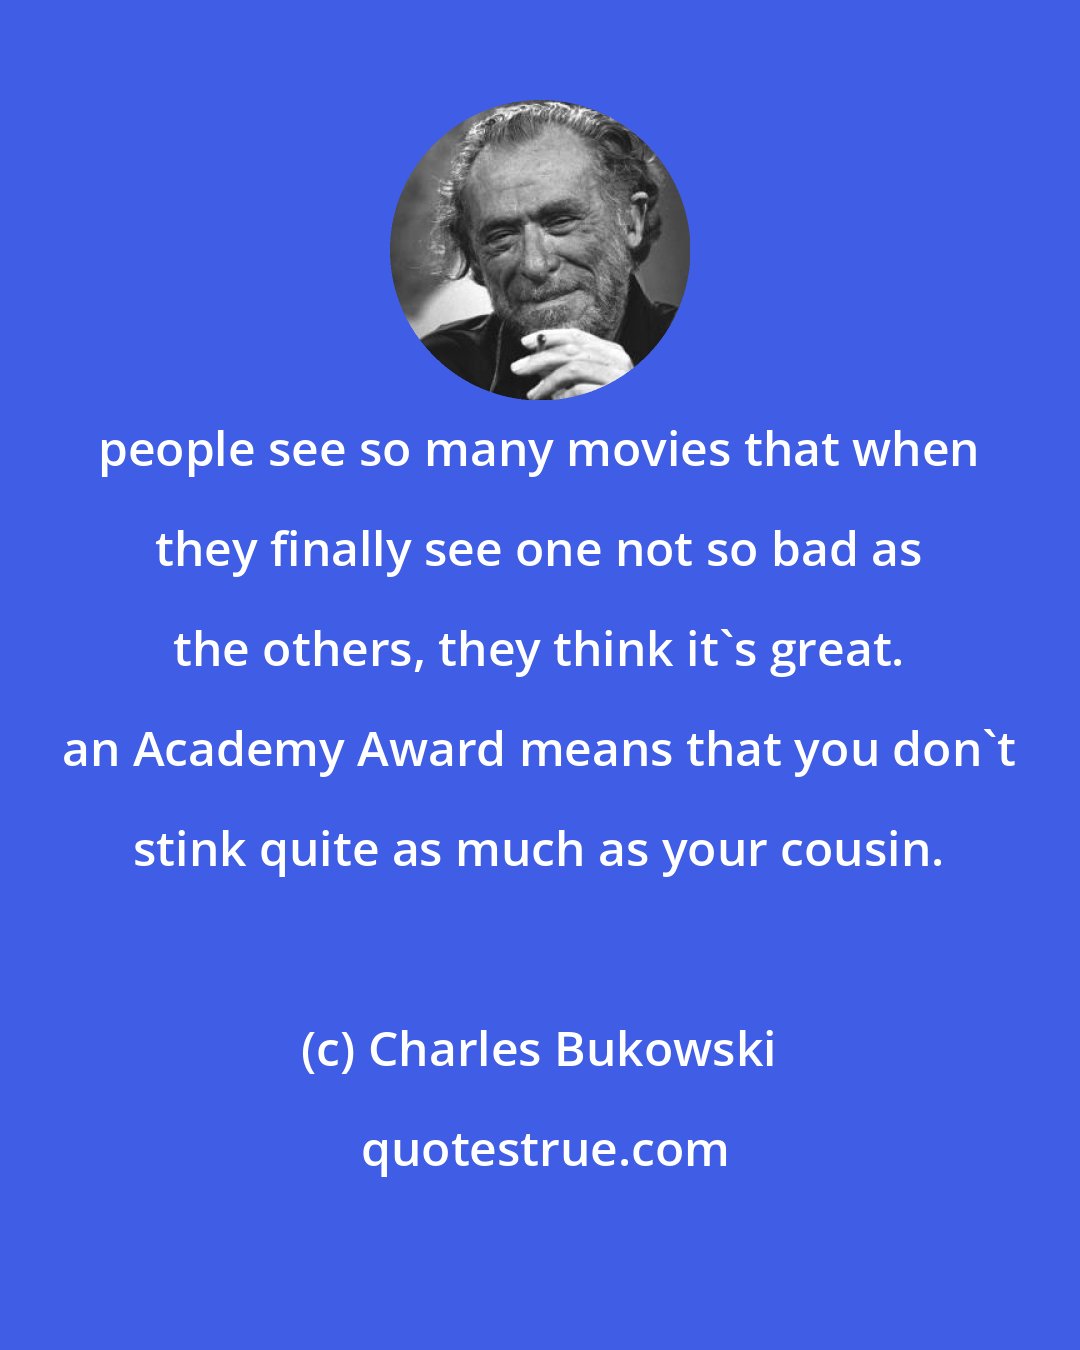 Charles Bukowski: people see so many movies that when they finally see one not so bad as the others, they think it's great. an Academy Award means that you don't stink quite as much as your cousin.